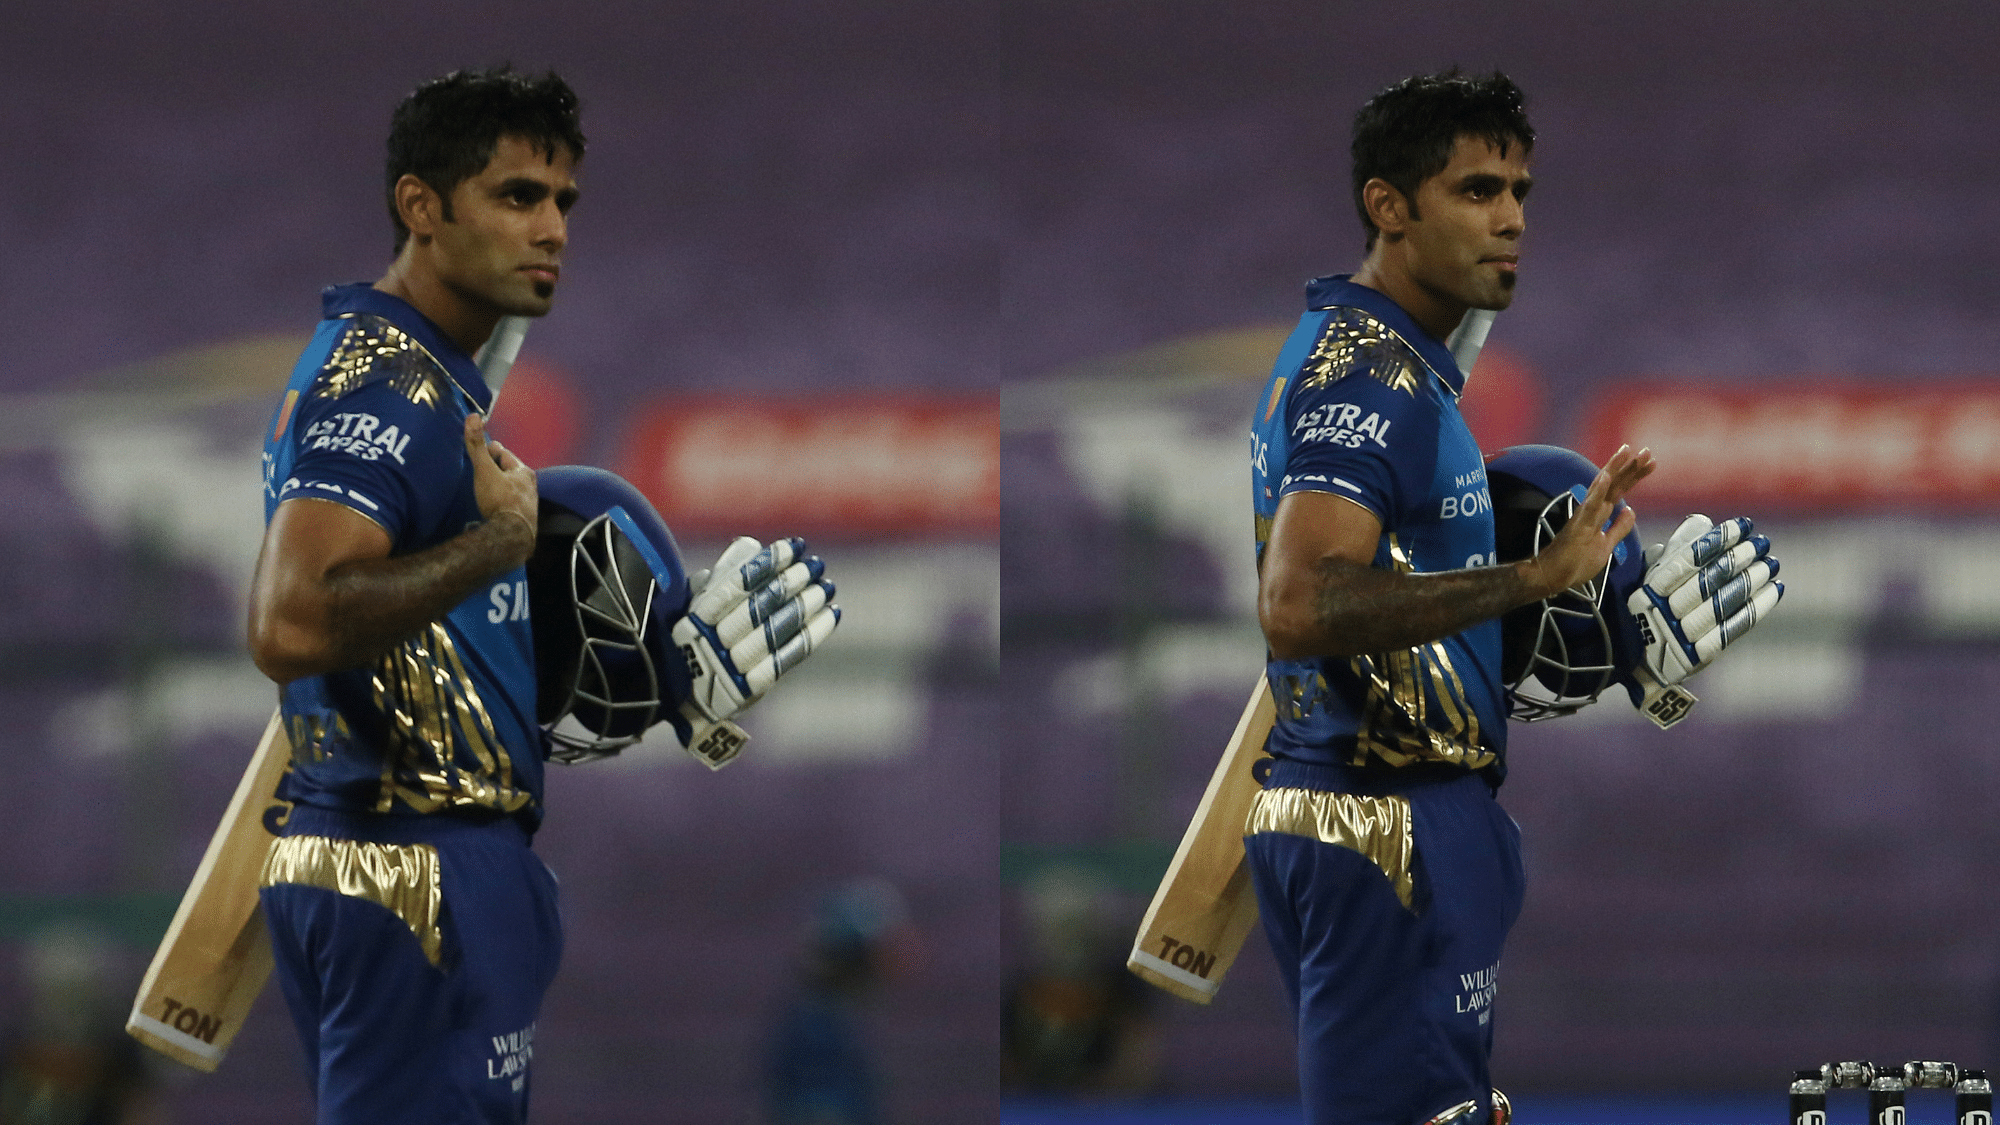 Suryakumar Yadav once again played a solid match-winning game for Mumbai Indians.